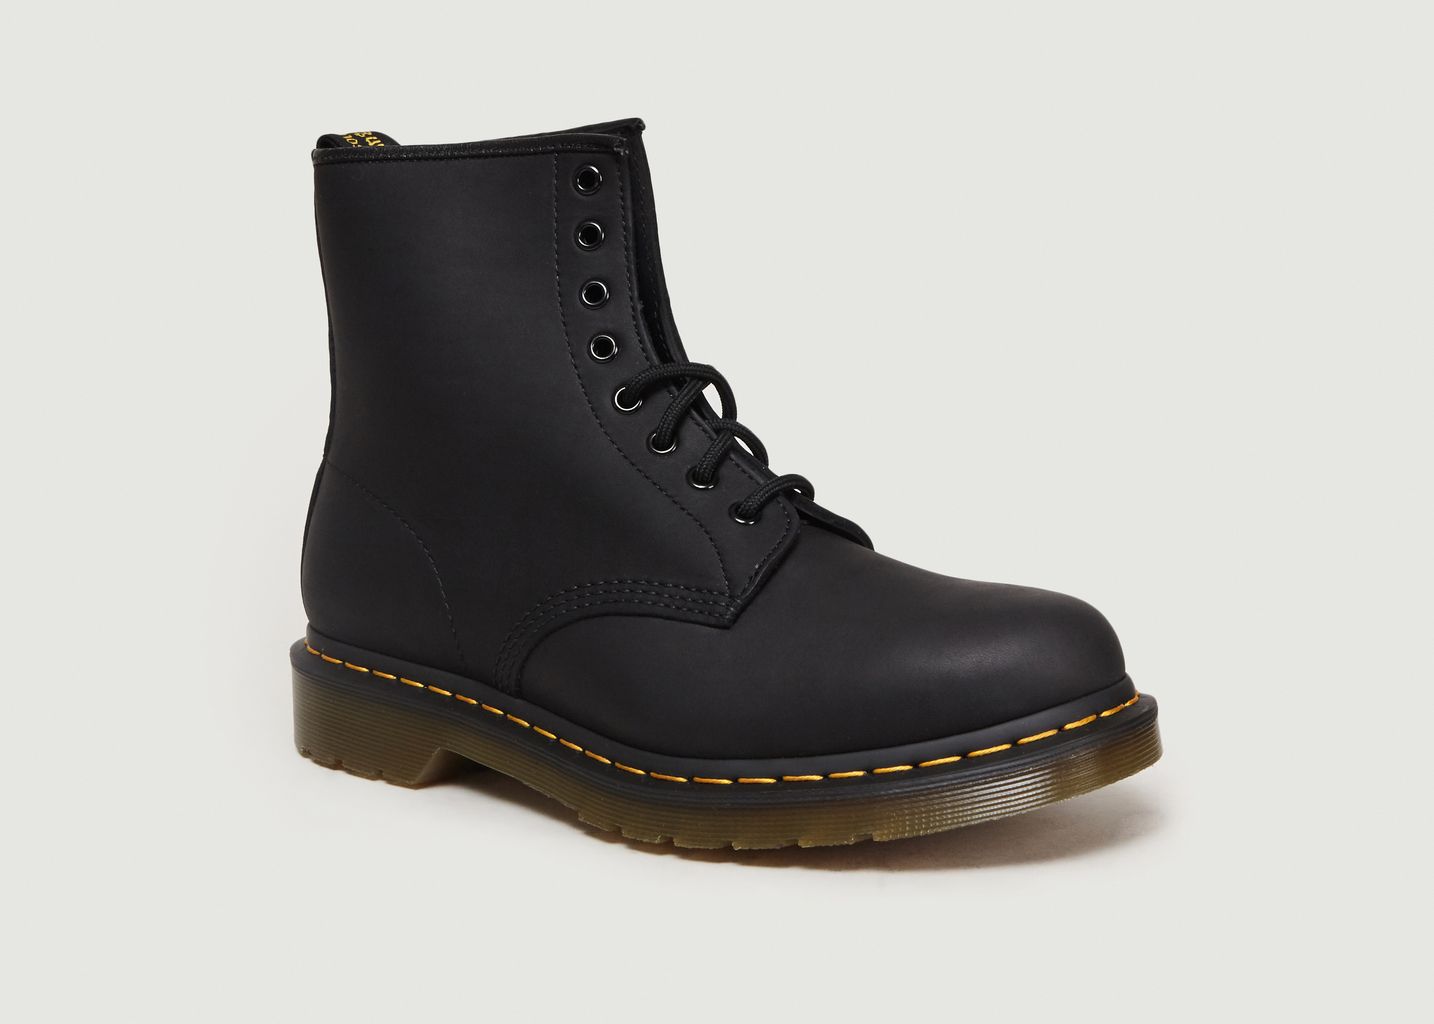 Black 1460 Greasy Boots